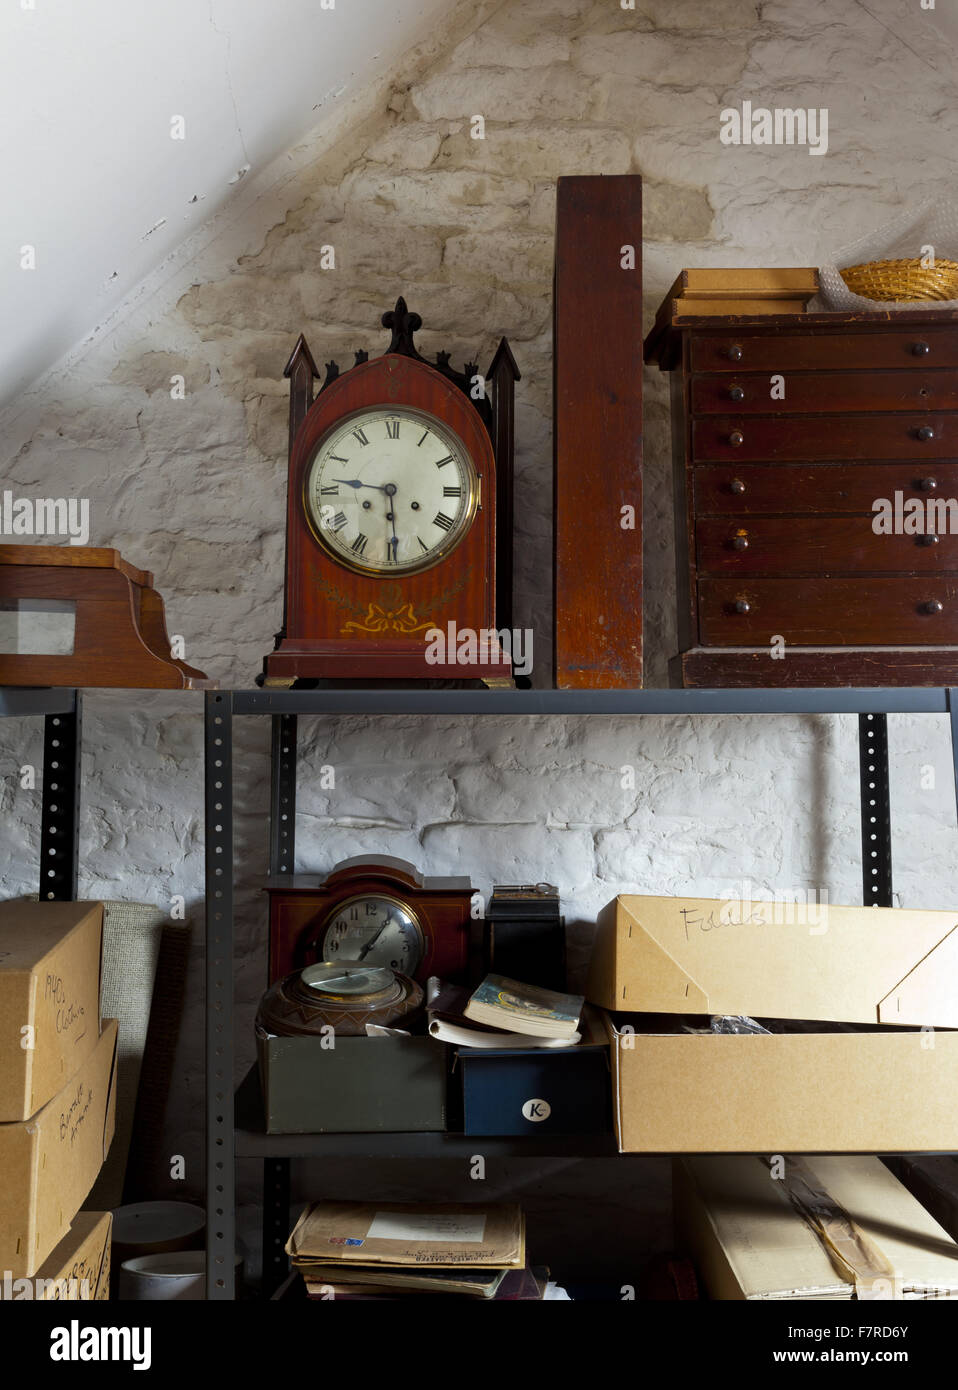 Objects stored in the attic at Eyam Hall and Craft Centre, Derbyshire. Eyam Hall is an unspoilt example of a gritstone Jacobean manor house, set within a walled garden. Stock Photo